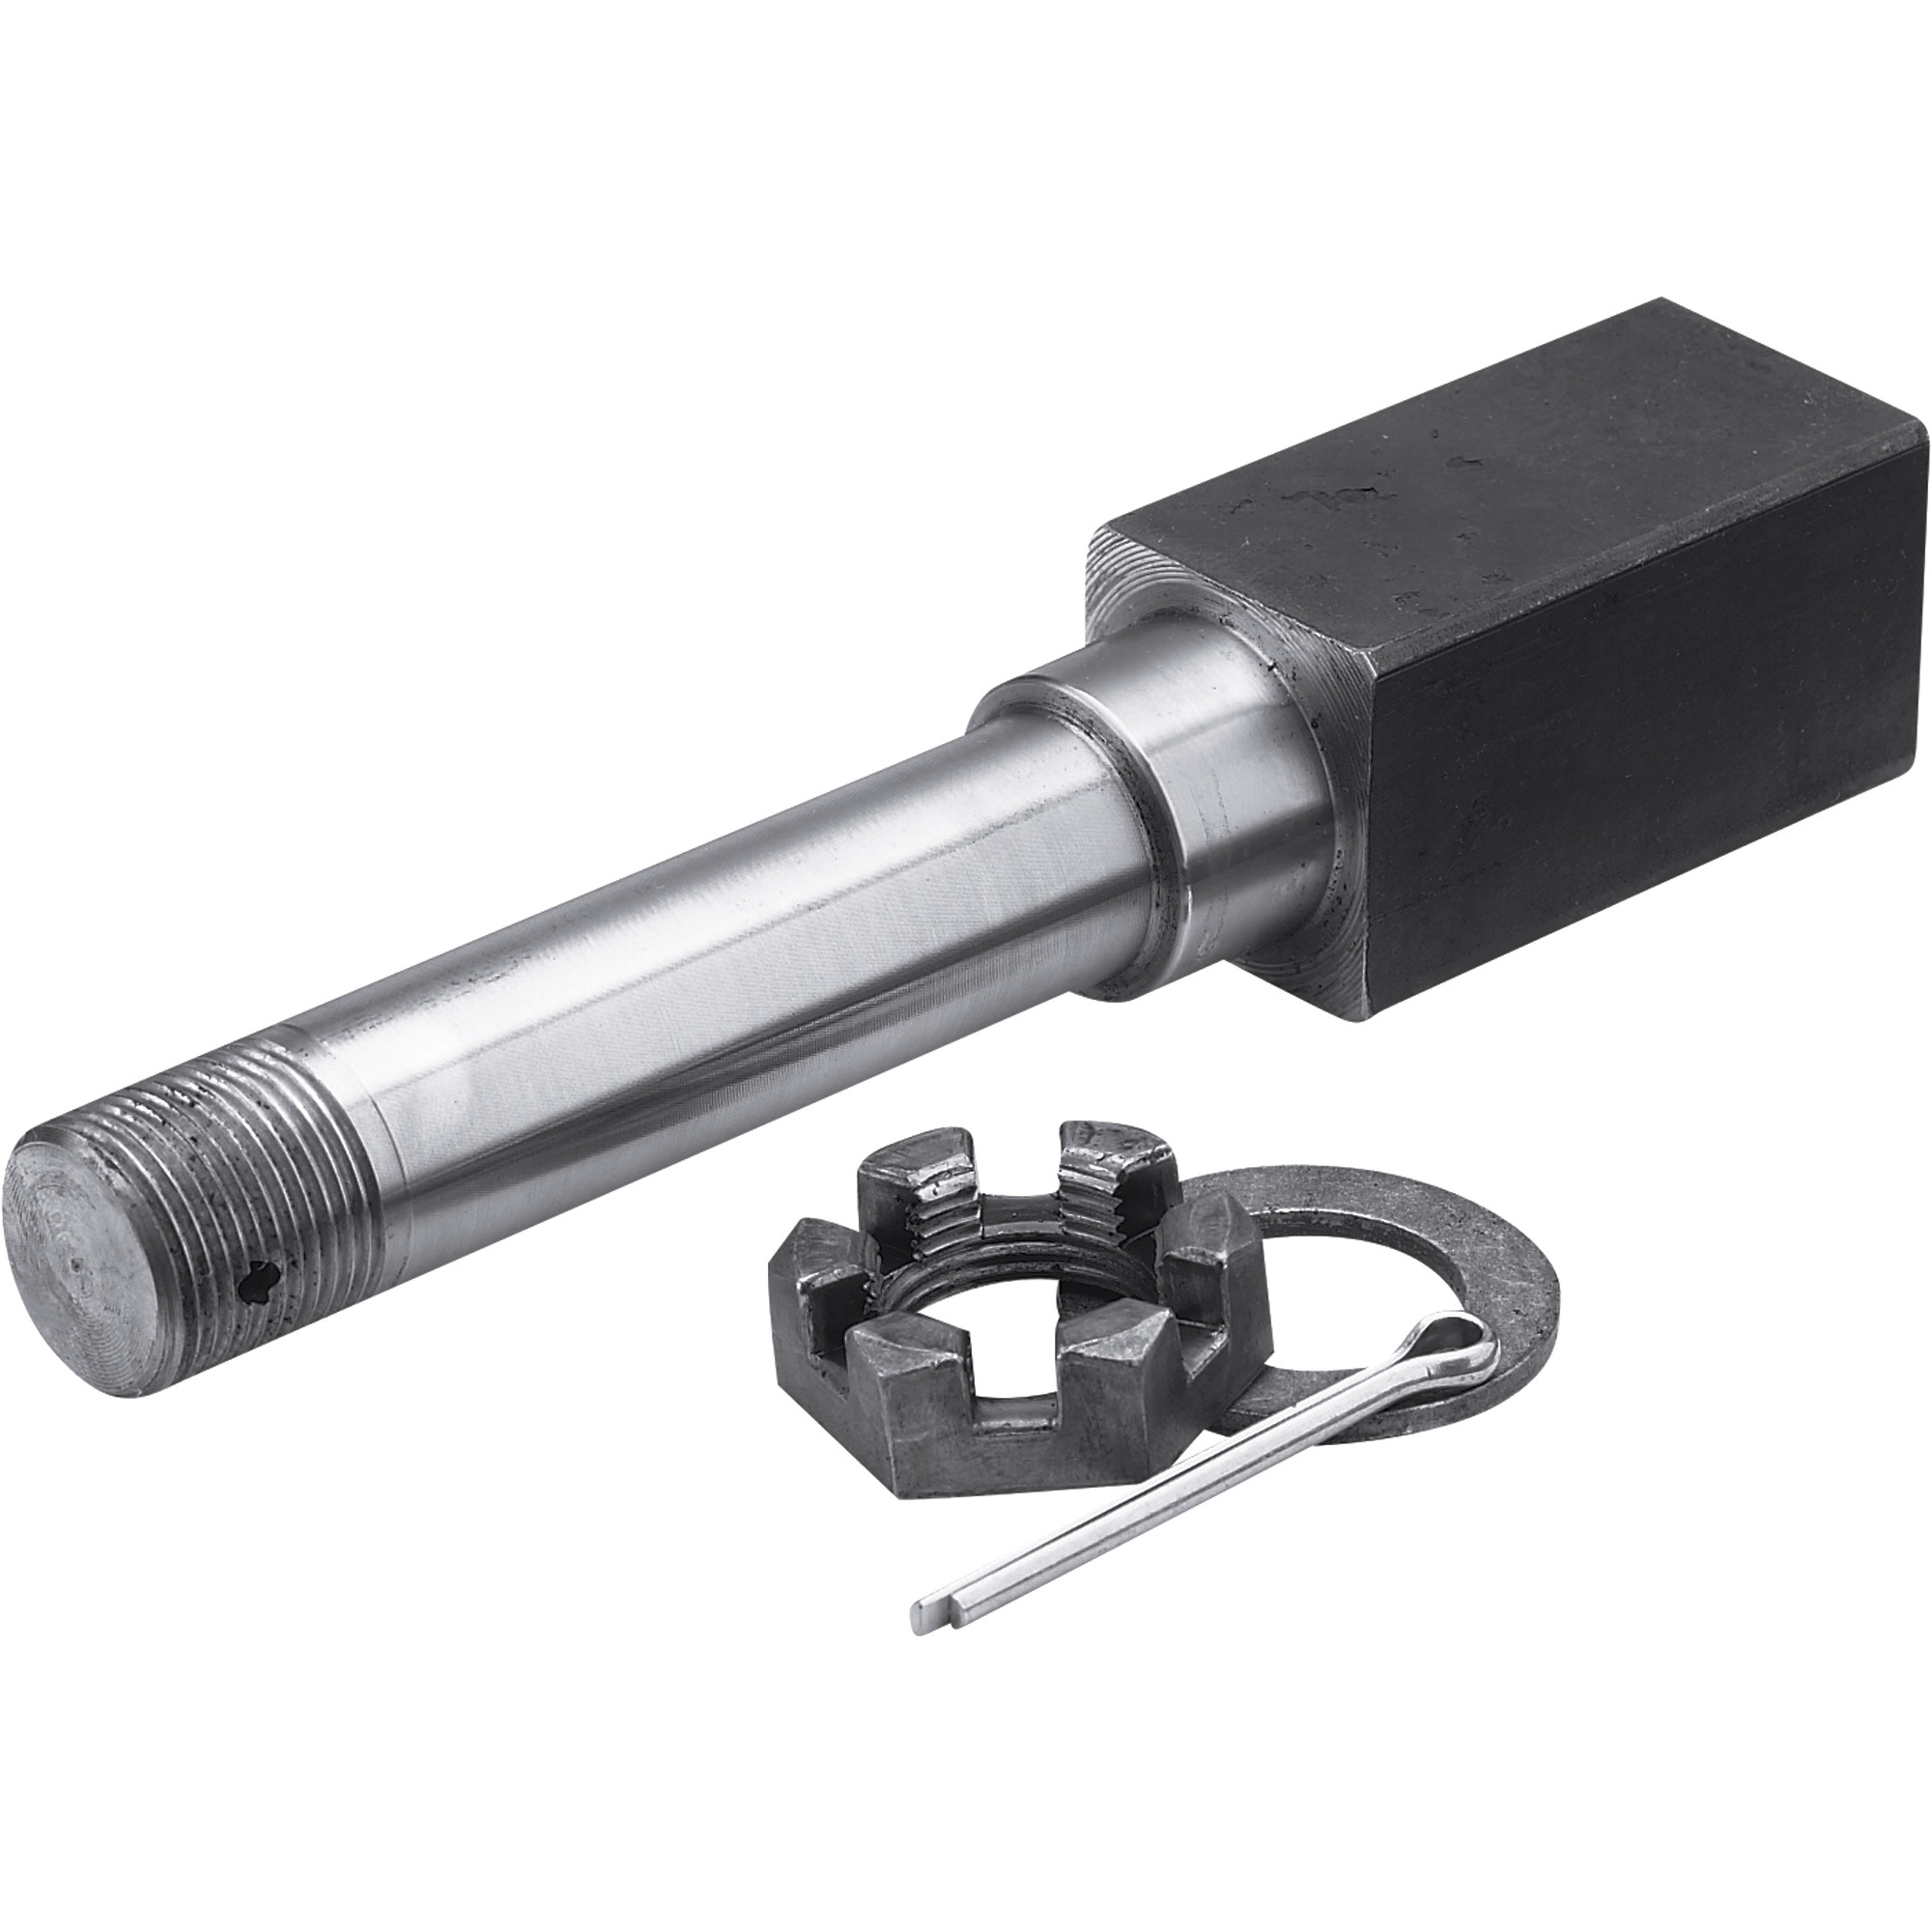 Ultra-Tow Axle Spindle â 1 1/2Inch Square, 8Inch Long, Single